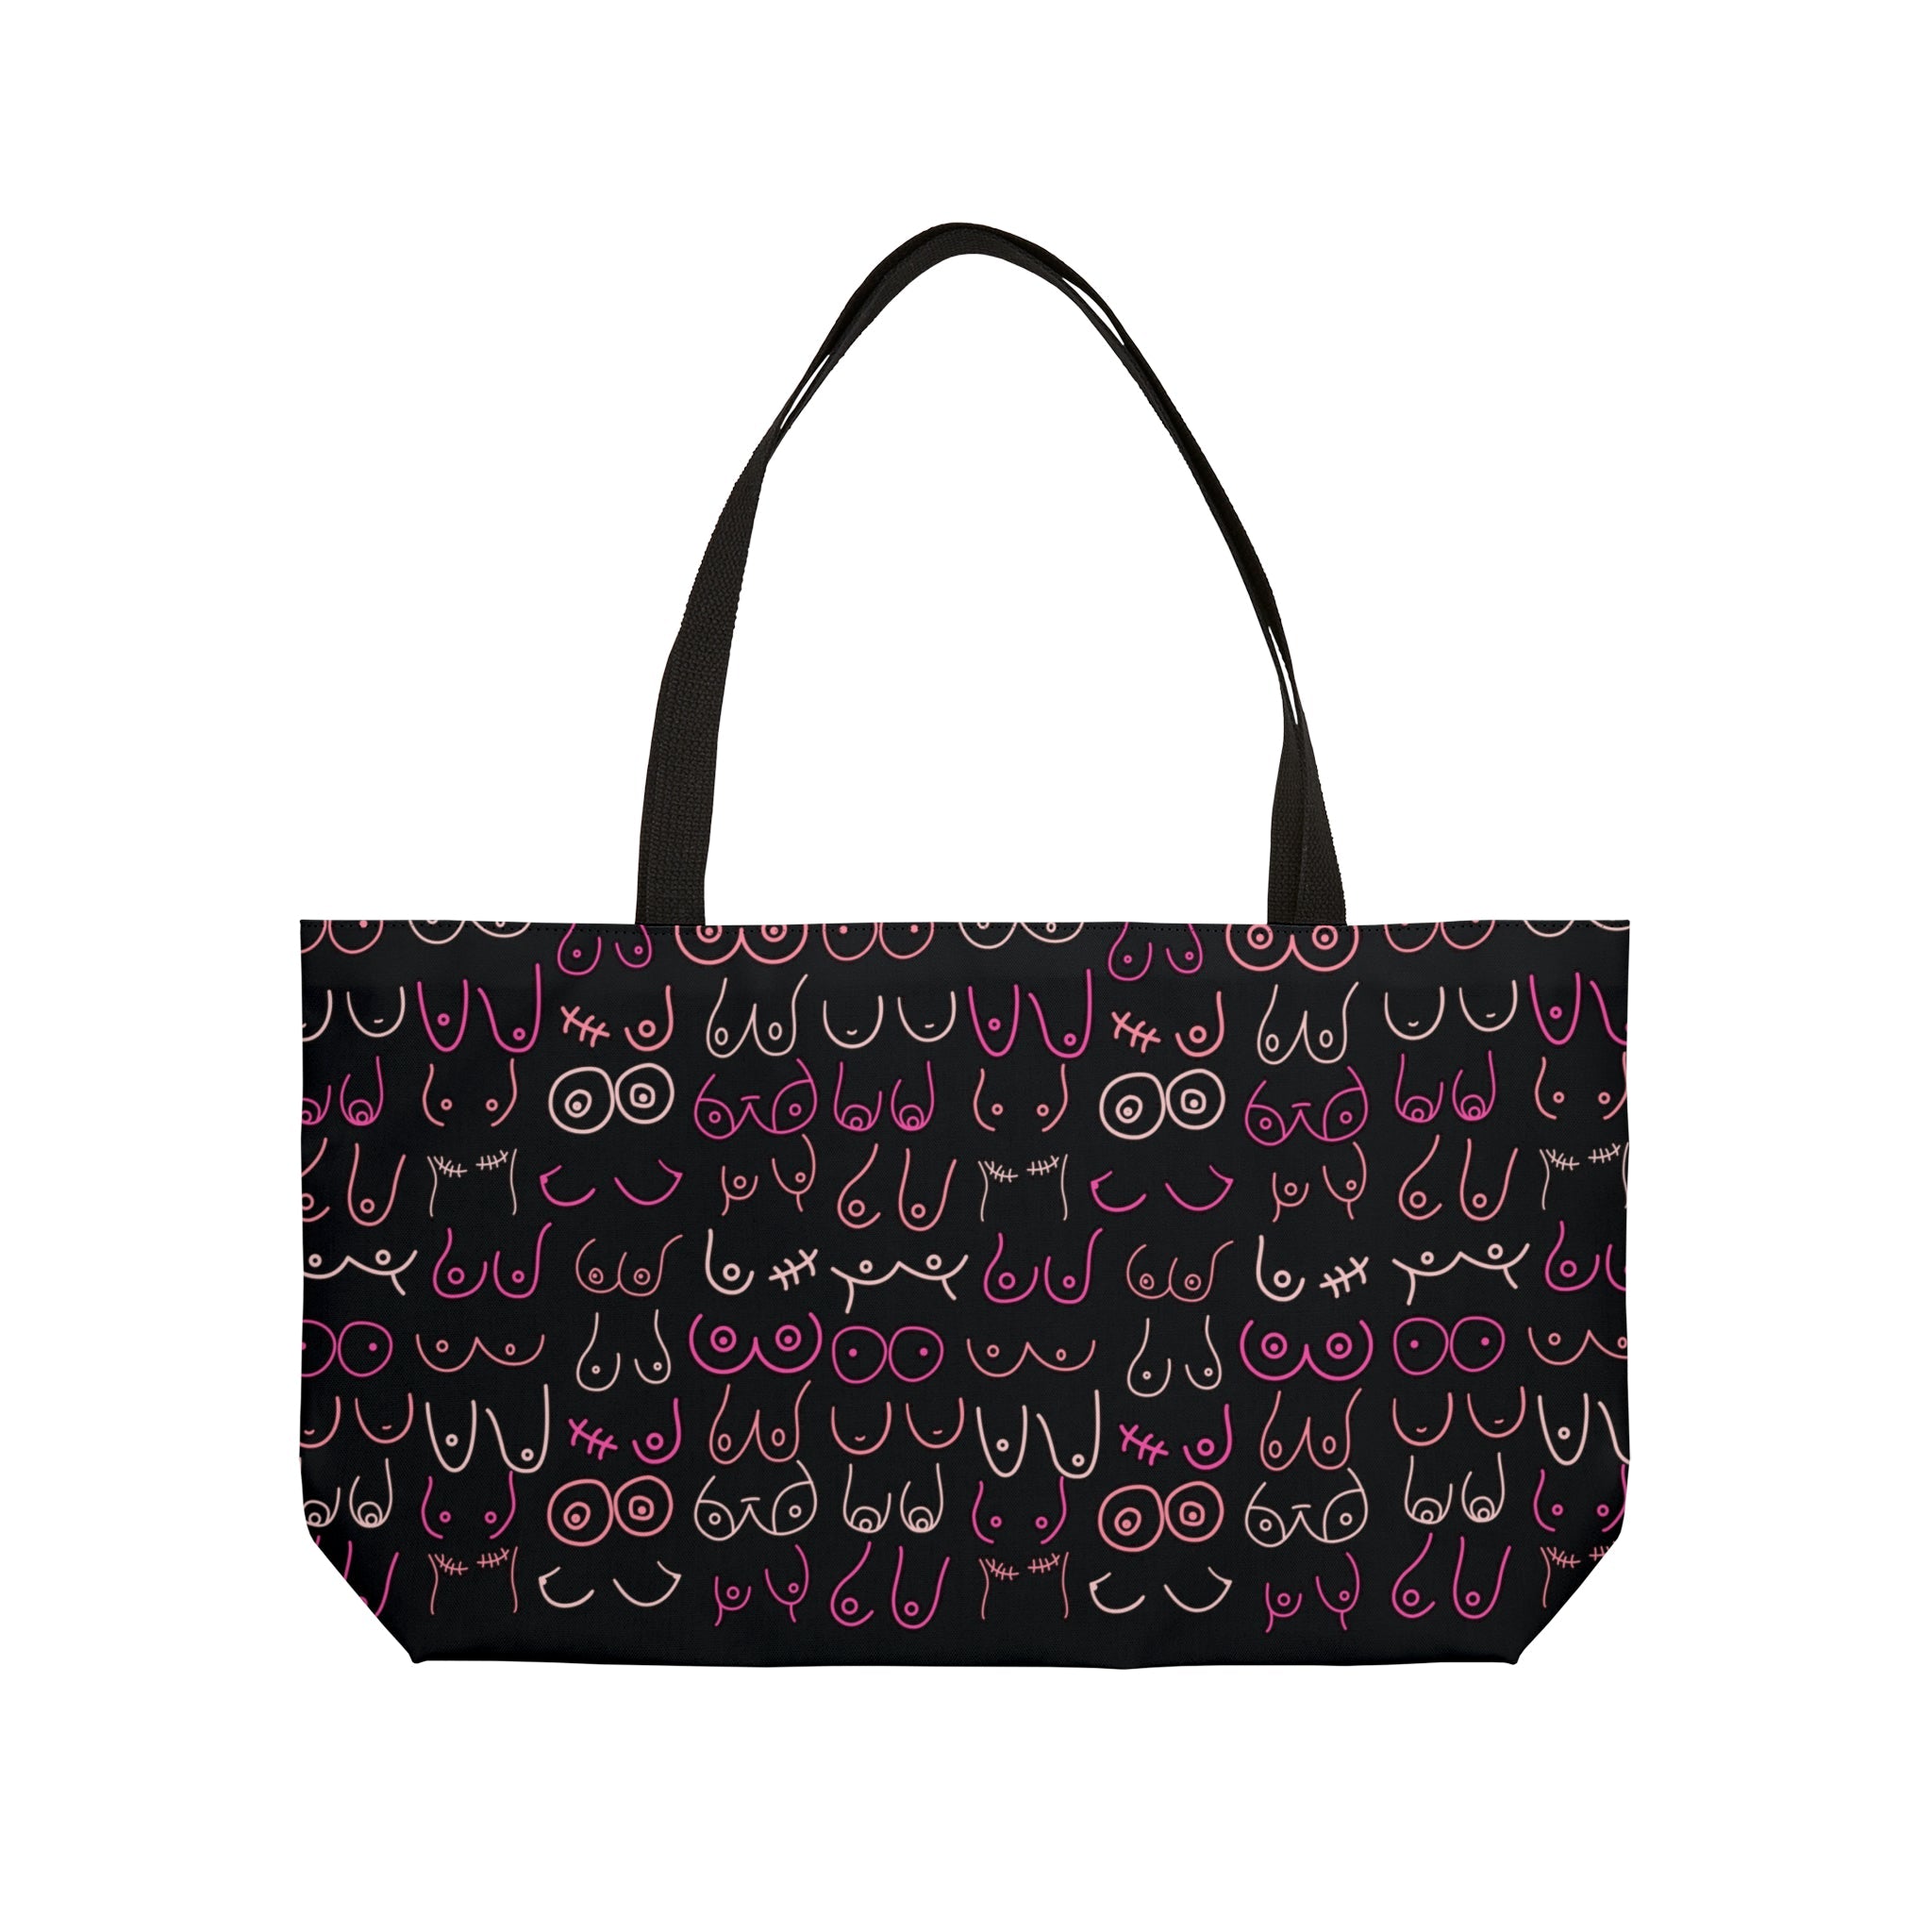 Save The Tatas Large Breast Cancer Awareness Tote Bag - The Kindness Cause